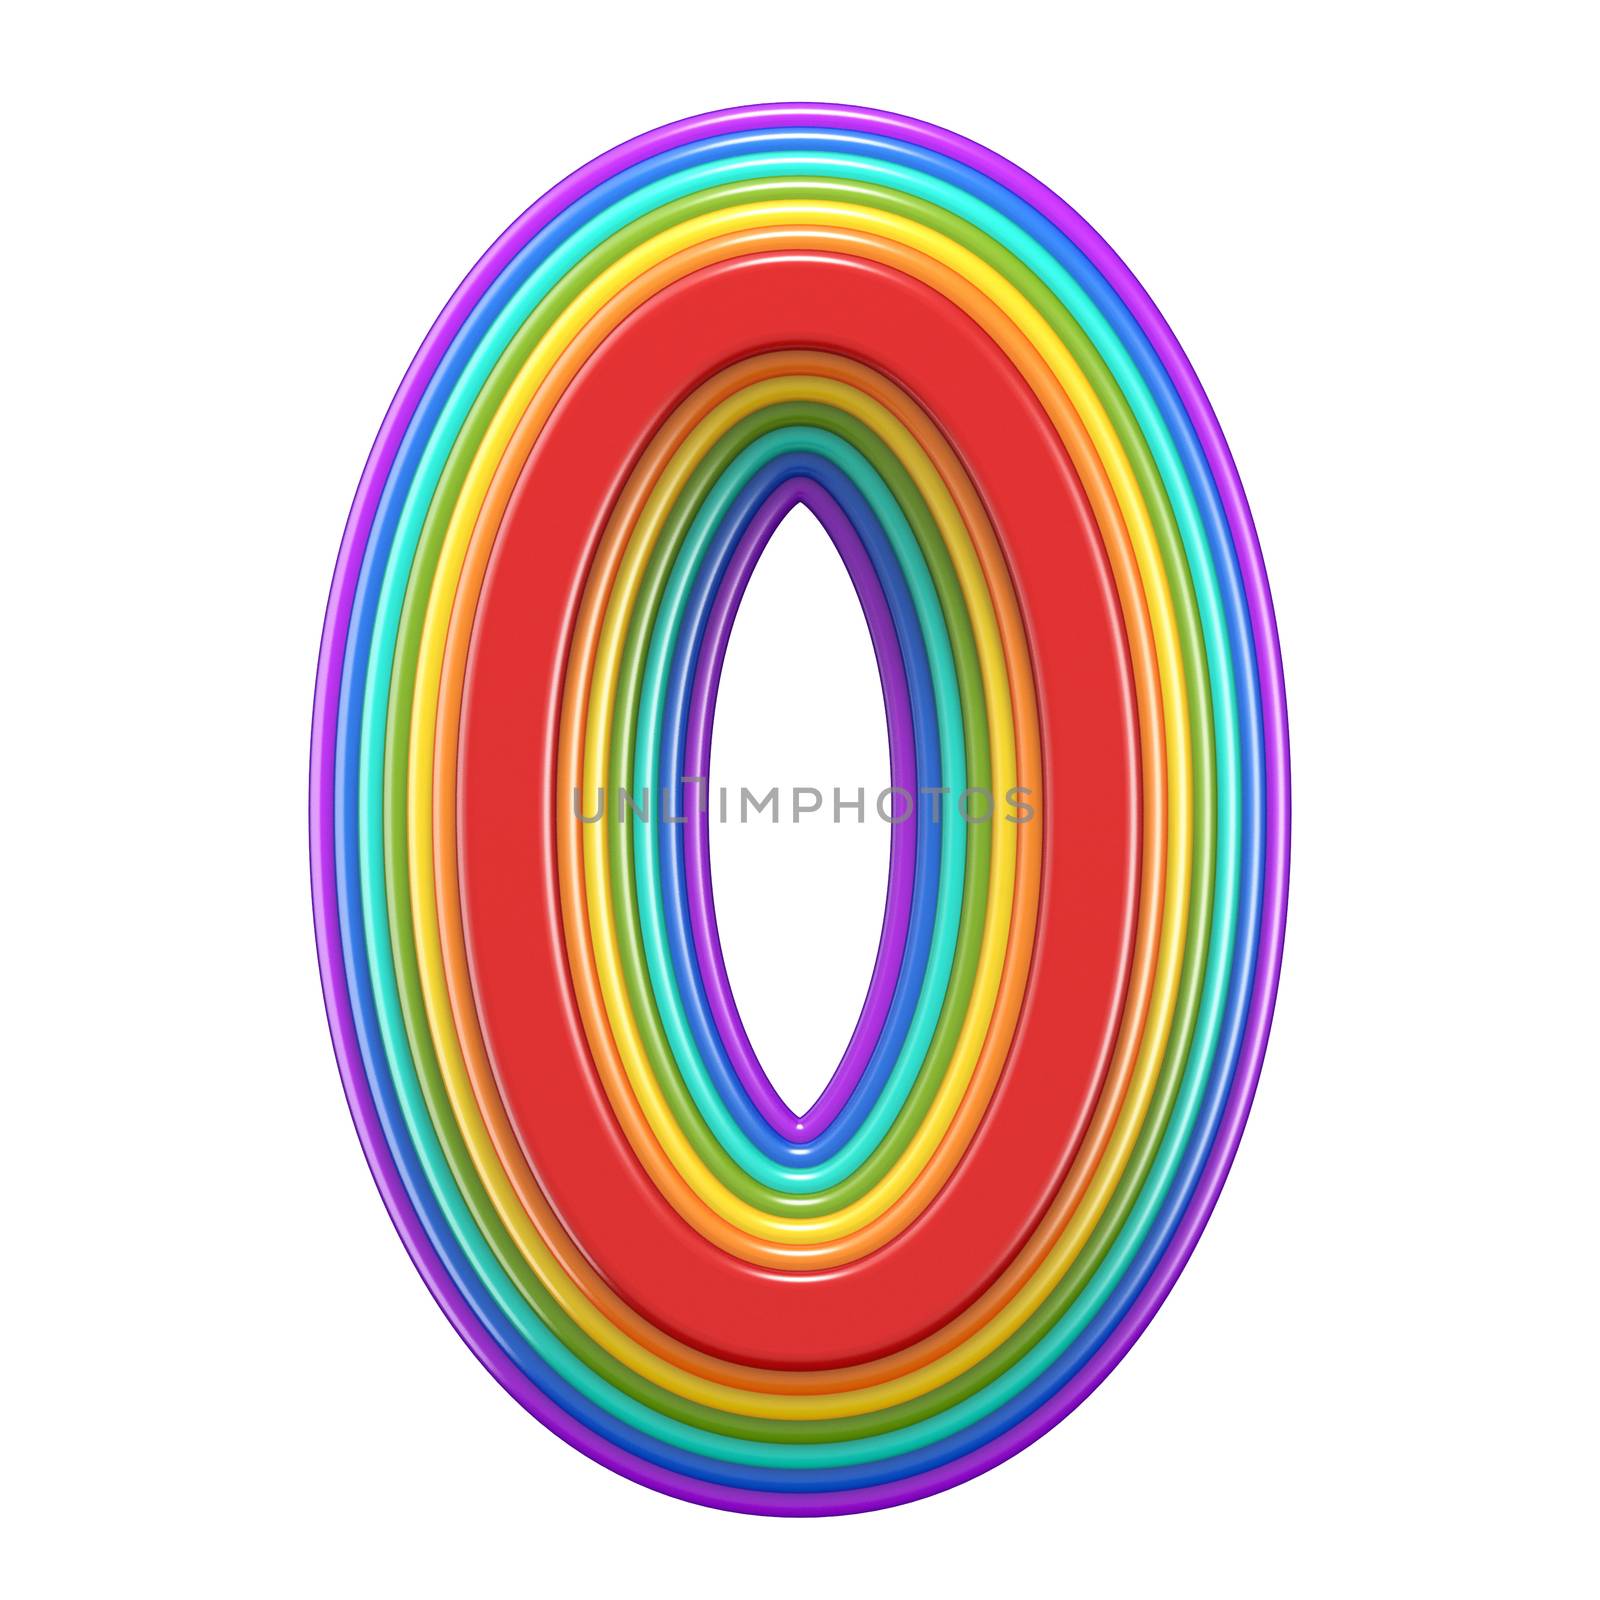 Concentric rainbow number 0 ZERO 3D rendering illustration isolated on white background